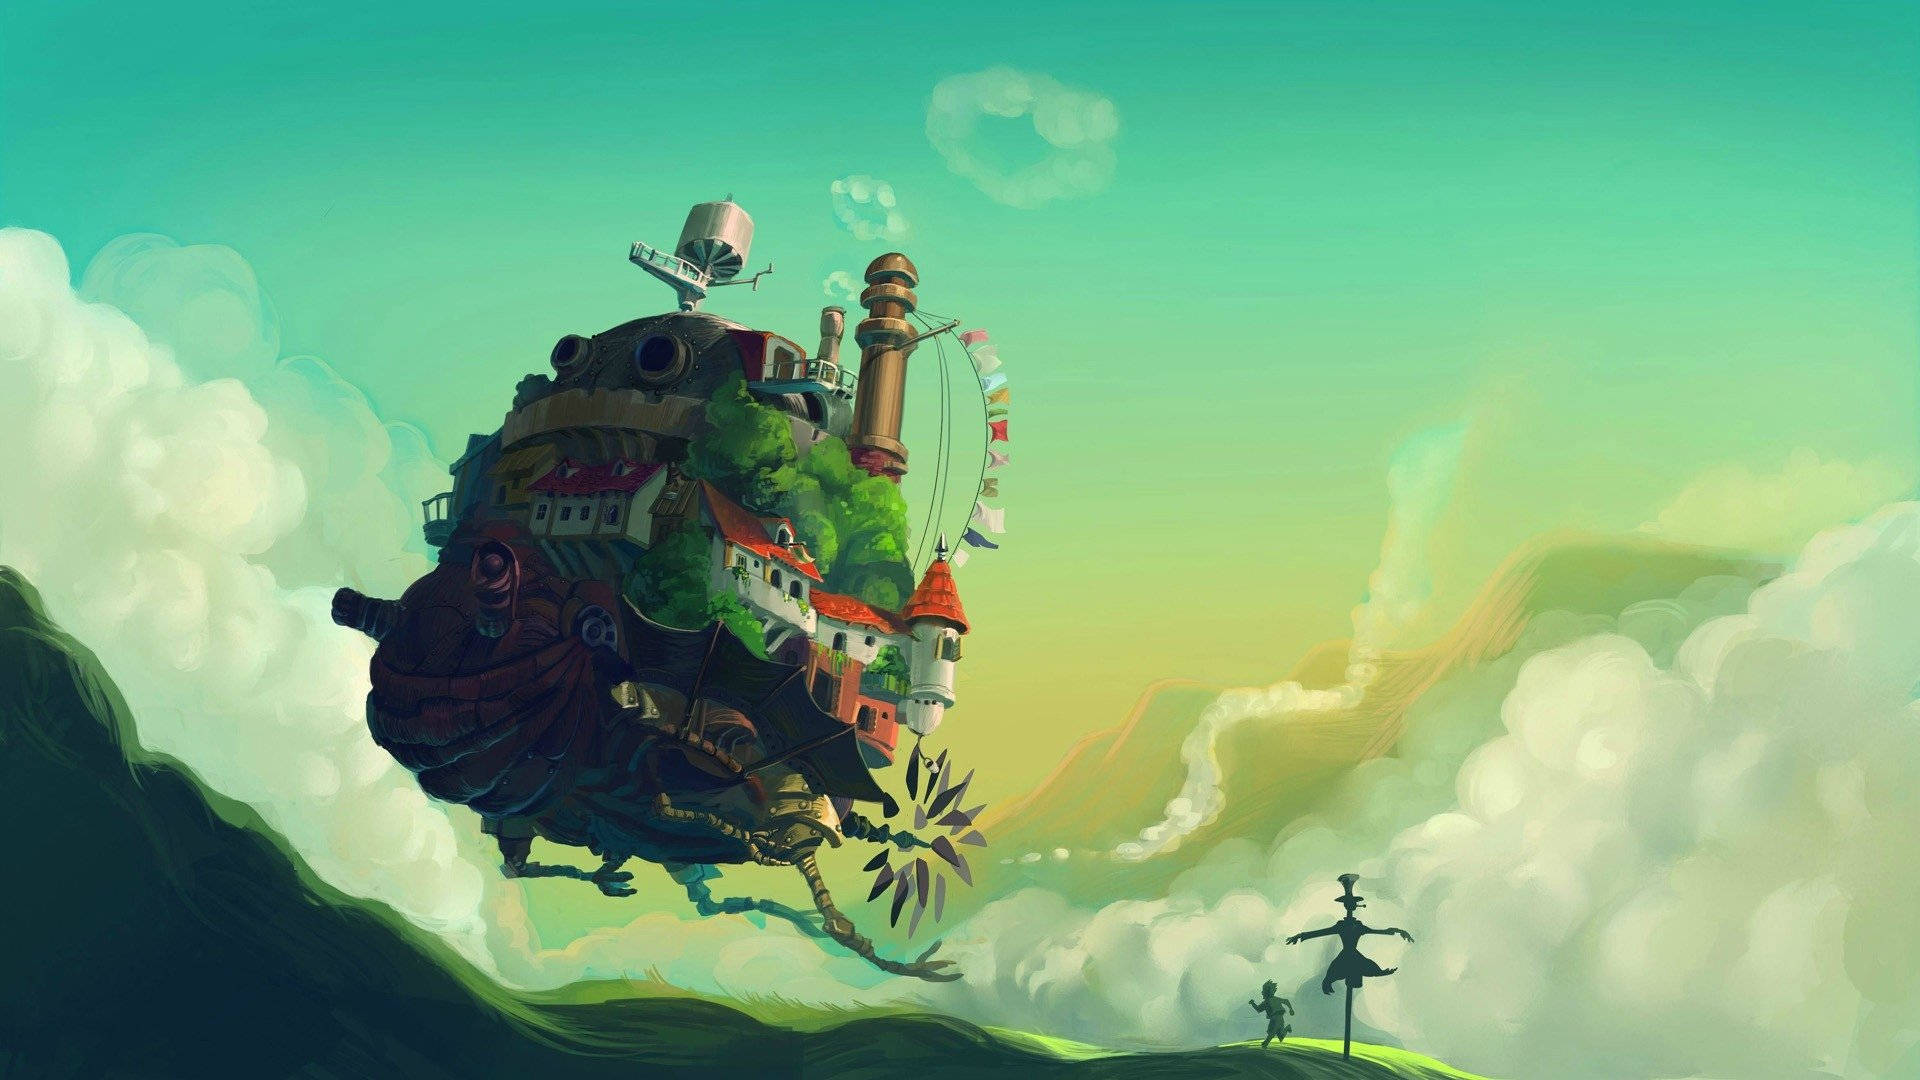 Captivating Art Of Howl's Moving Castle